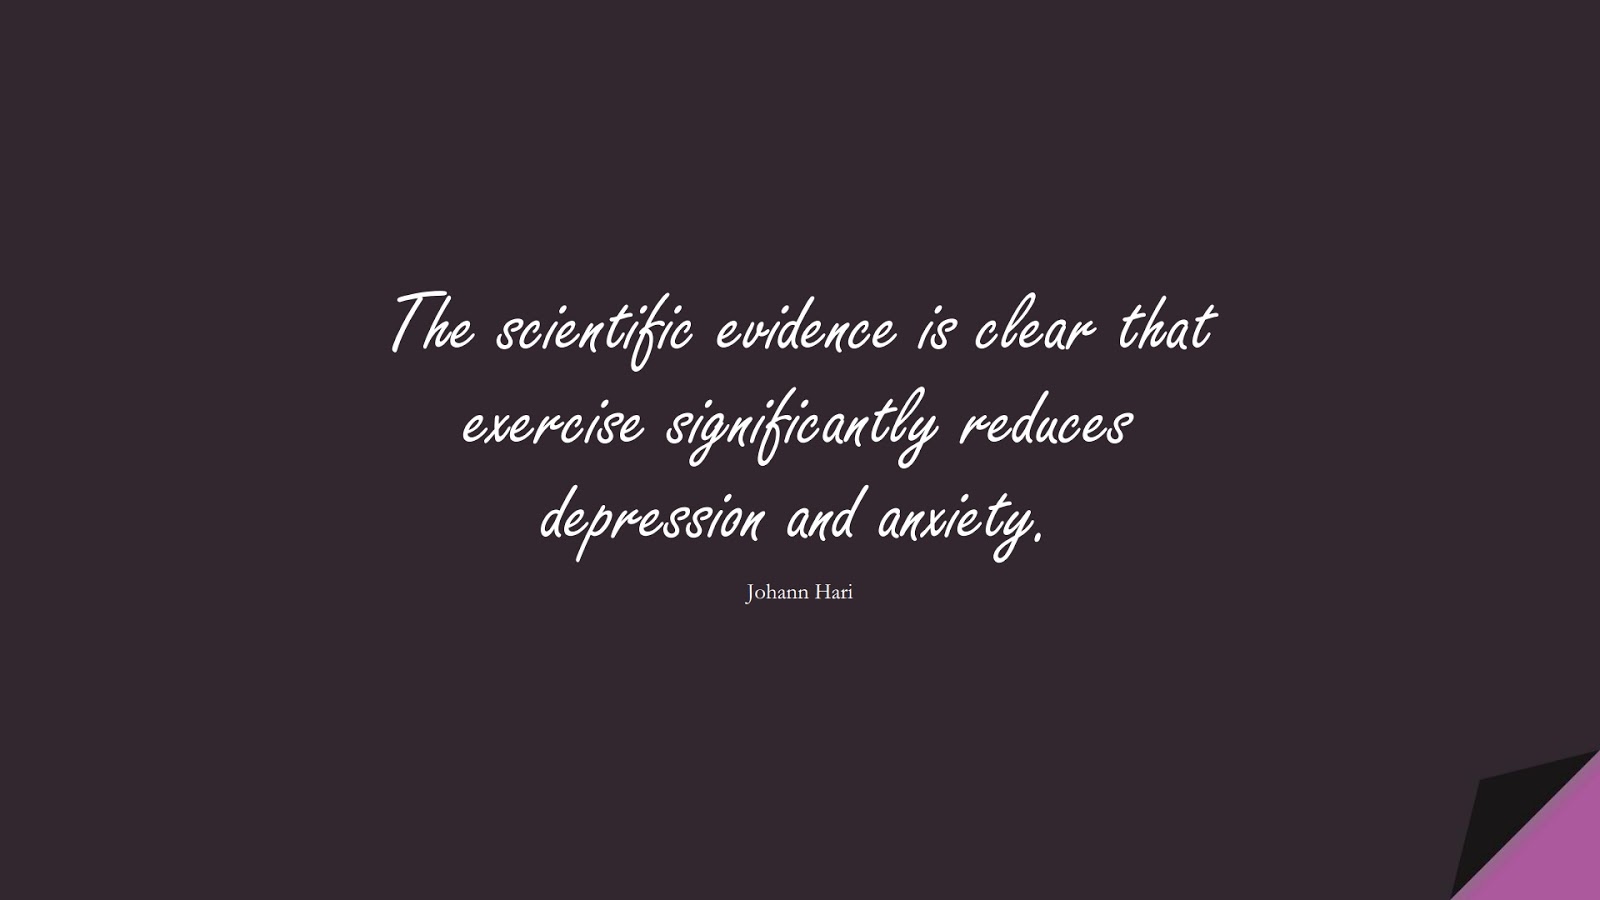 The scientific evidence is clear that exercise significantly reduces depression and anxiety. (Johann Hari);  #DepressionQuotes